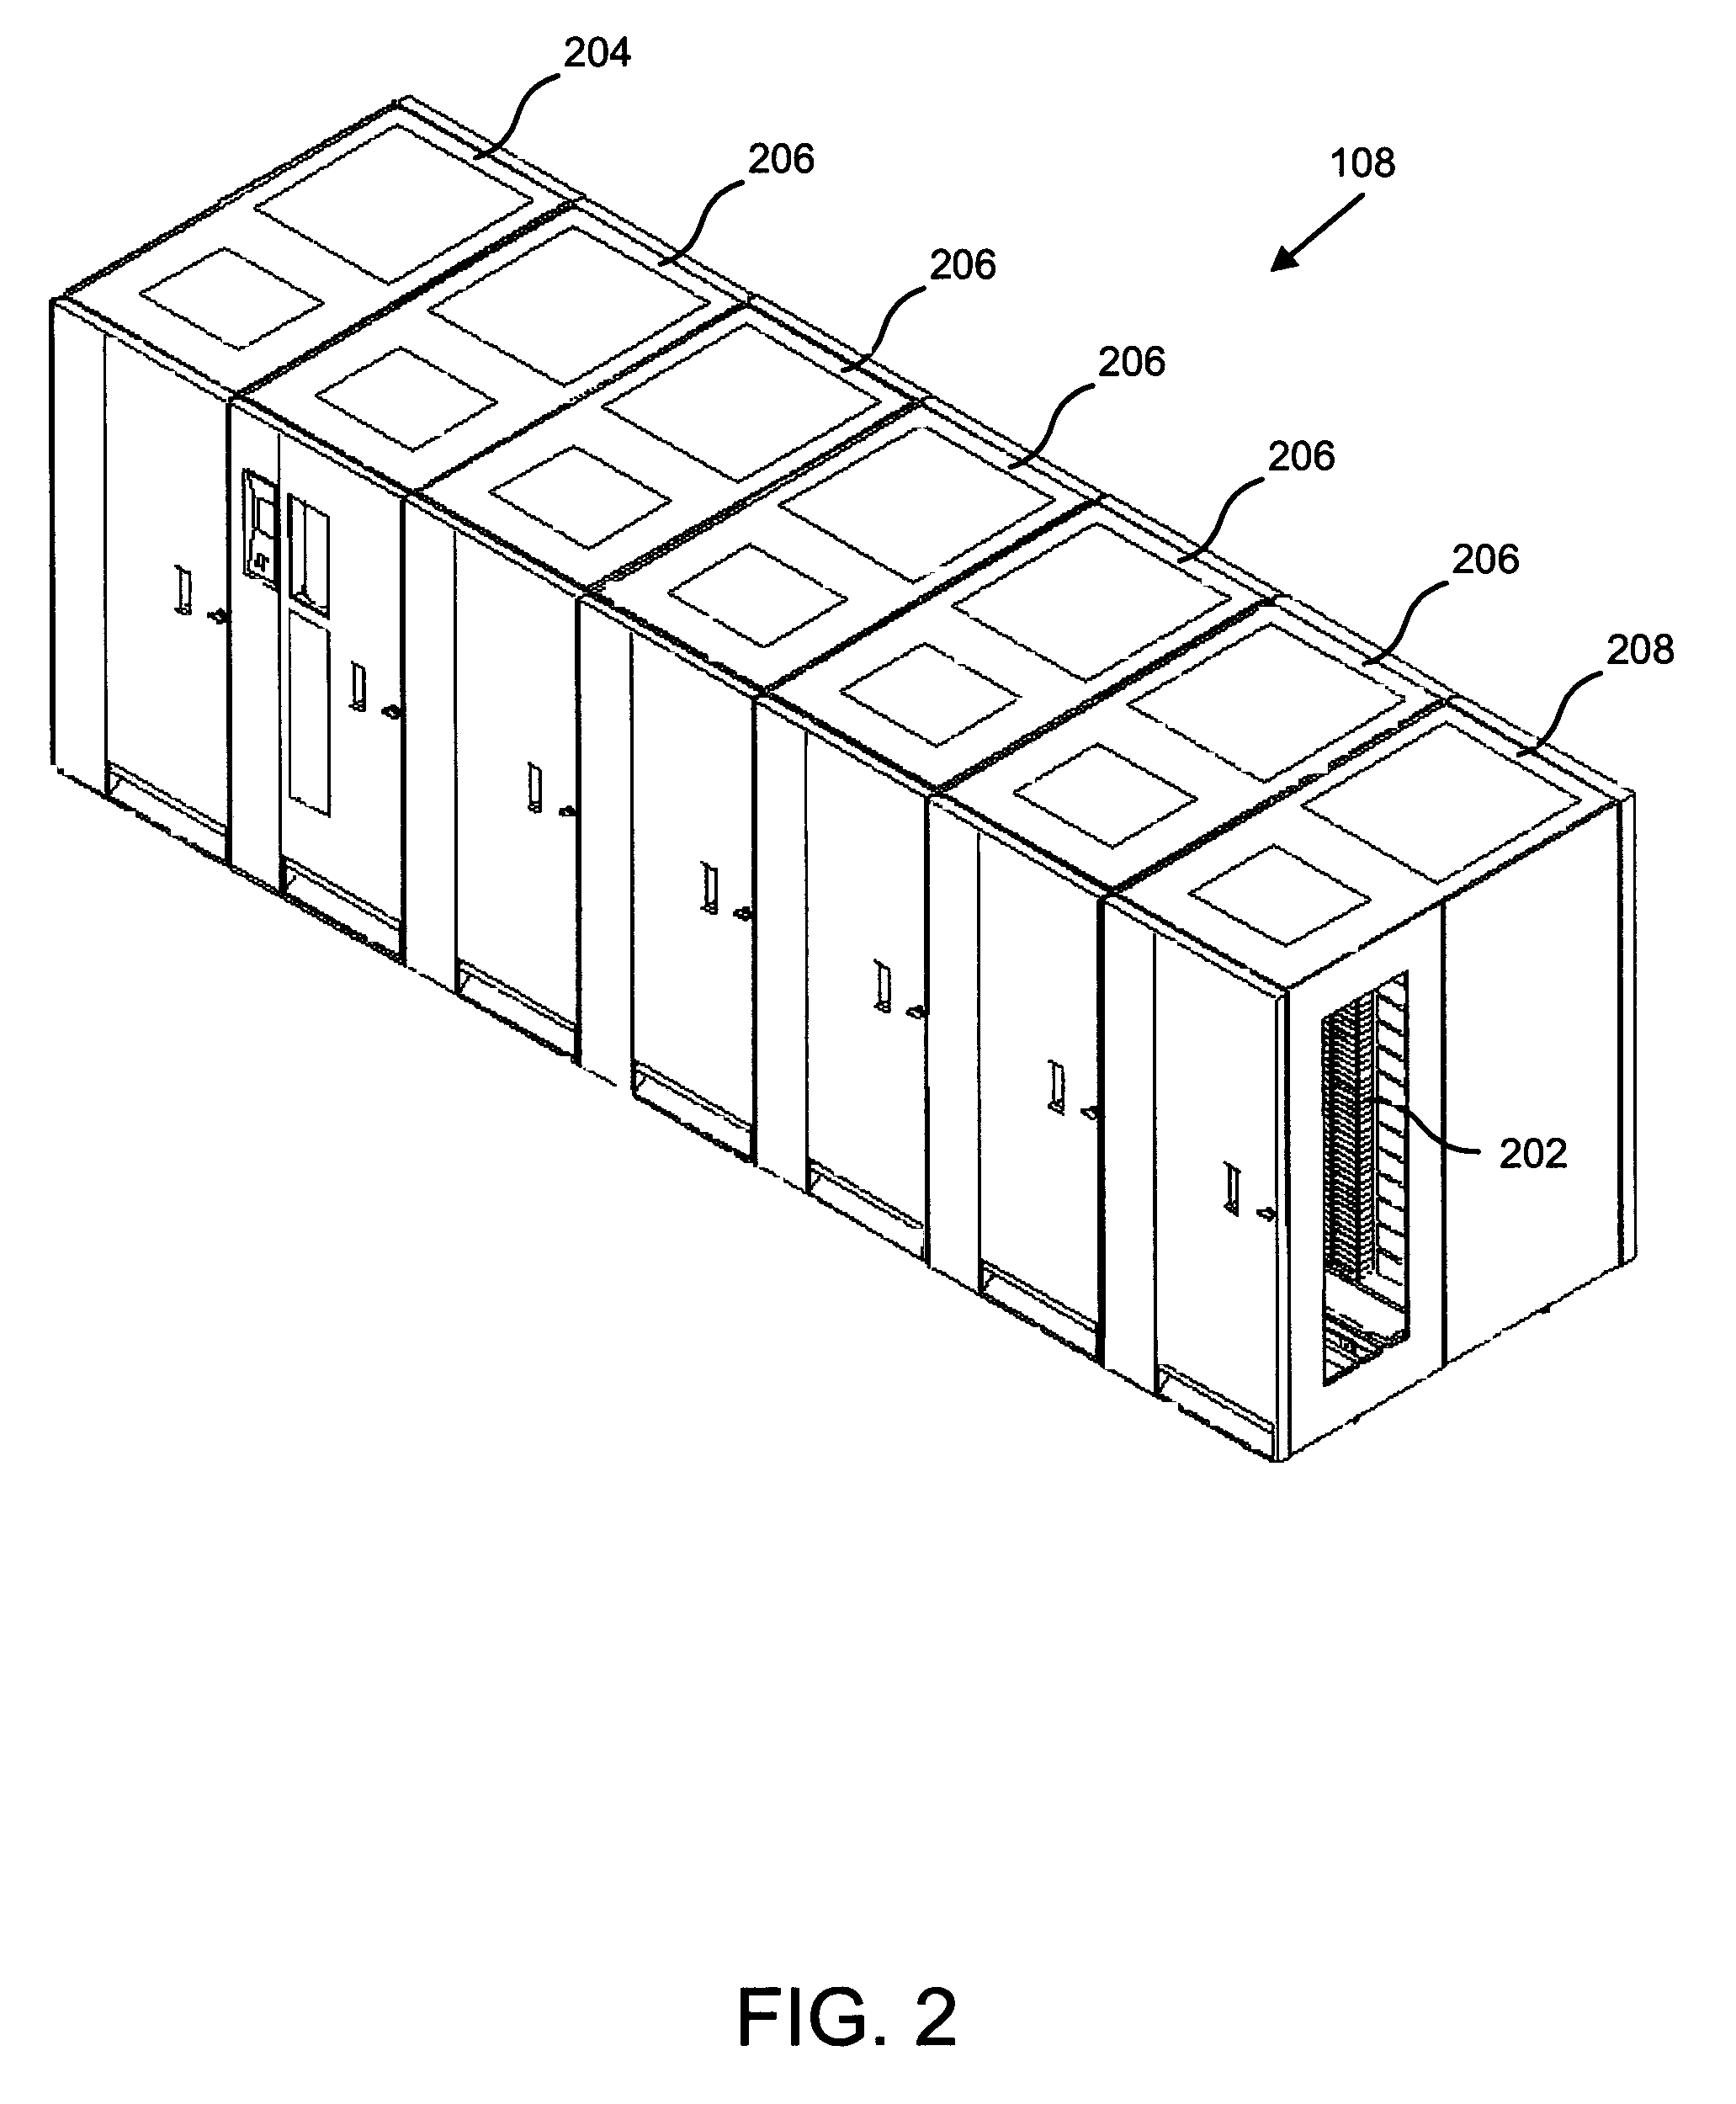 Apparatus, system, and method for quick access grid bus connection of storage cells in automated storage libraries